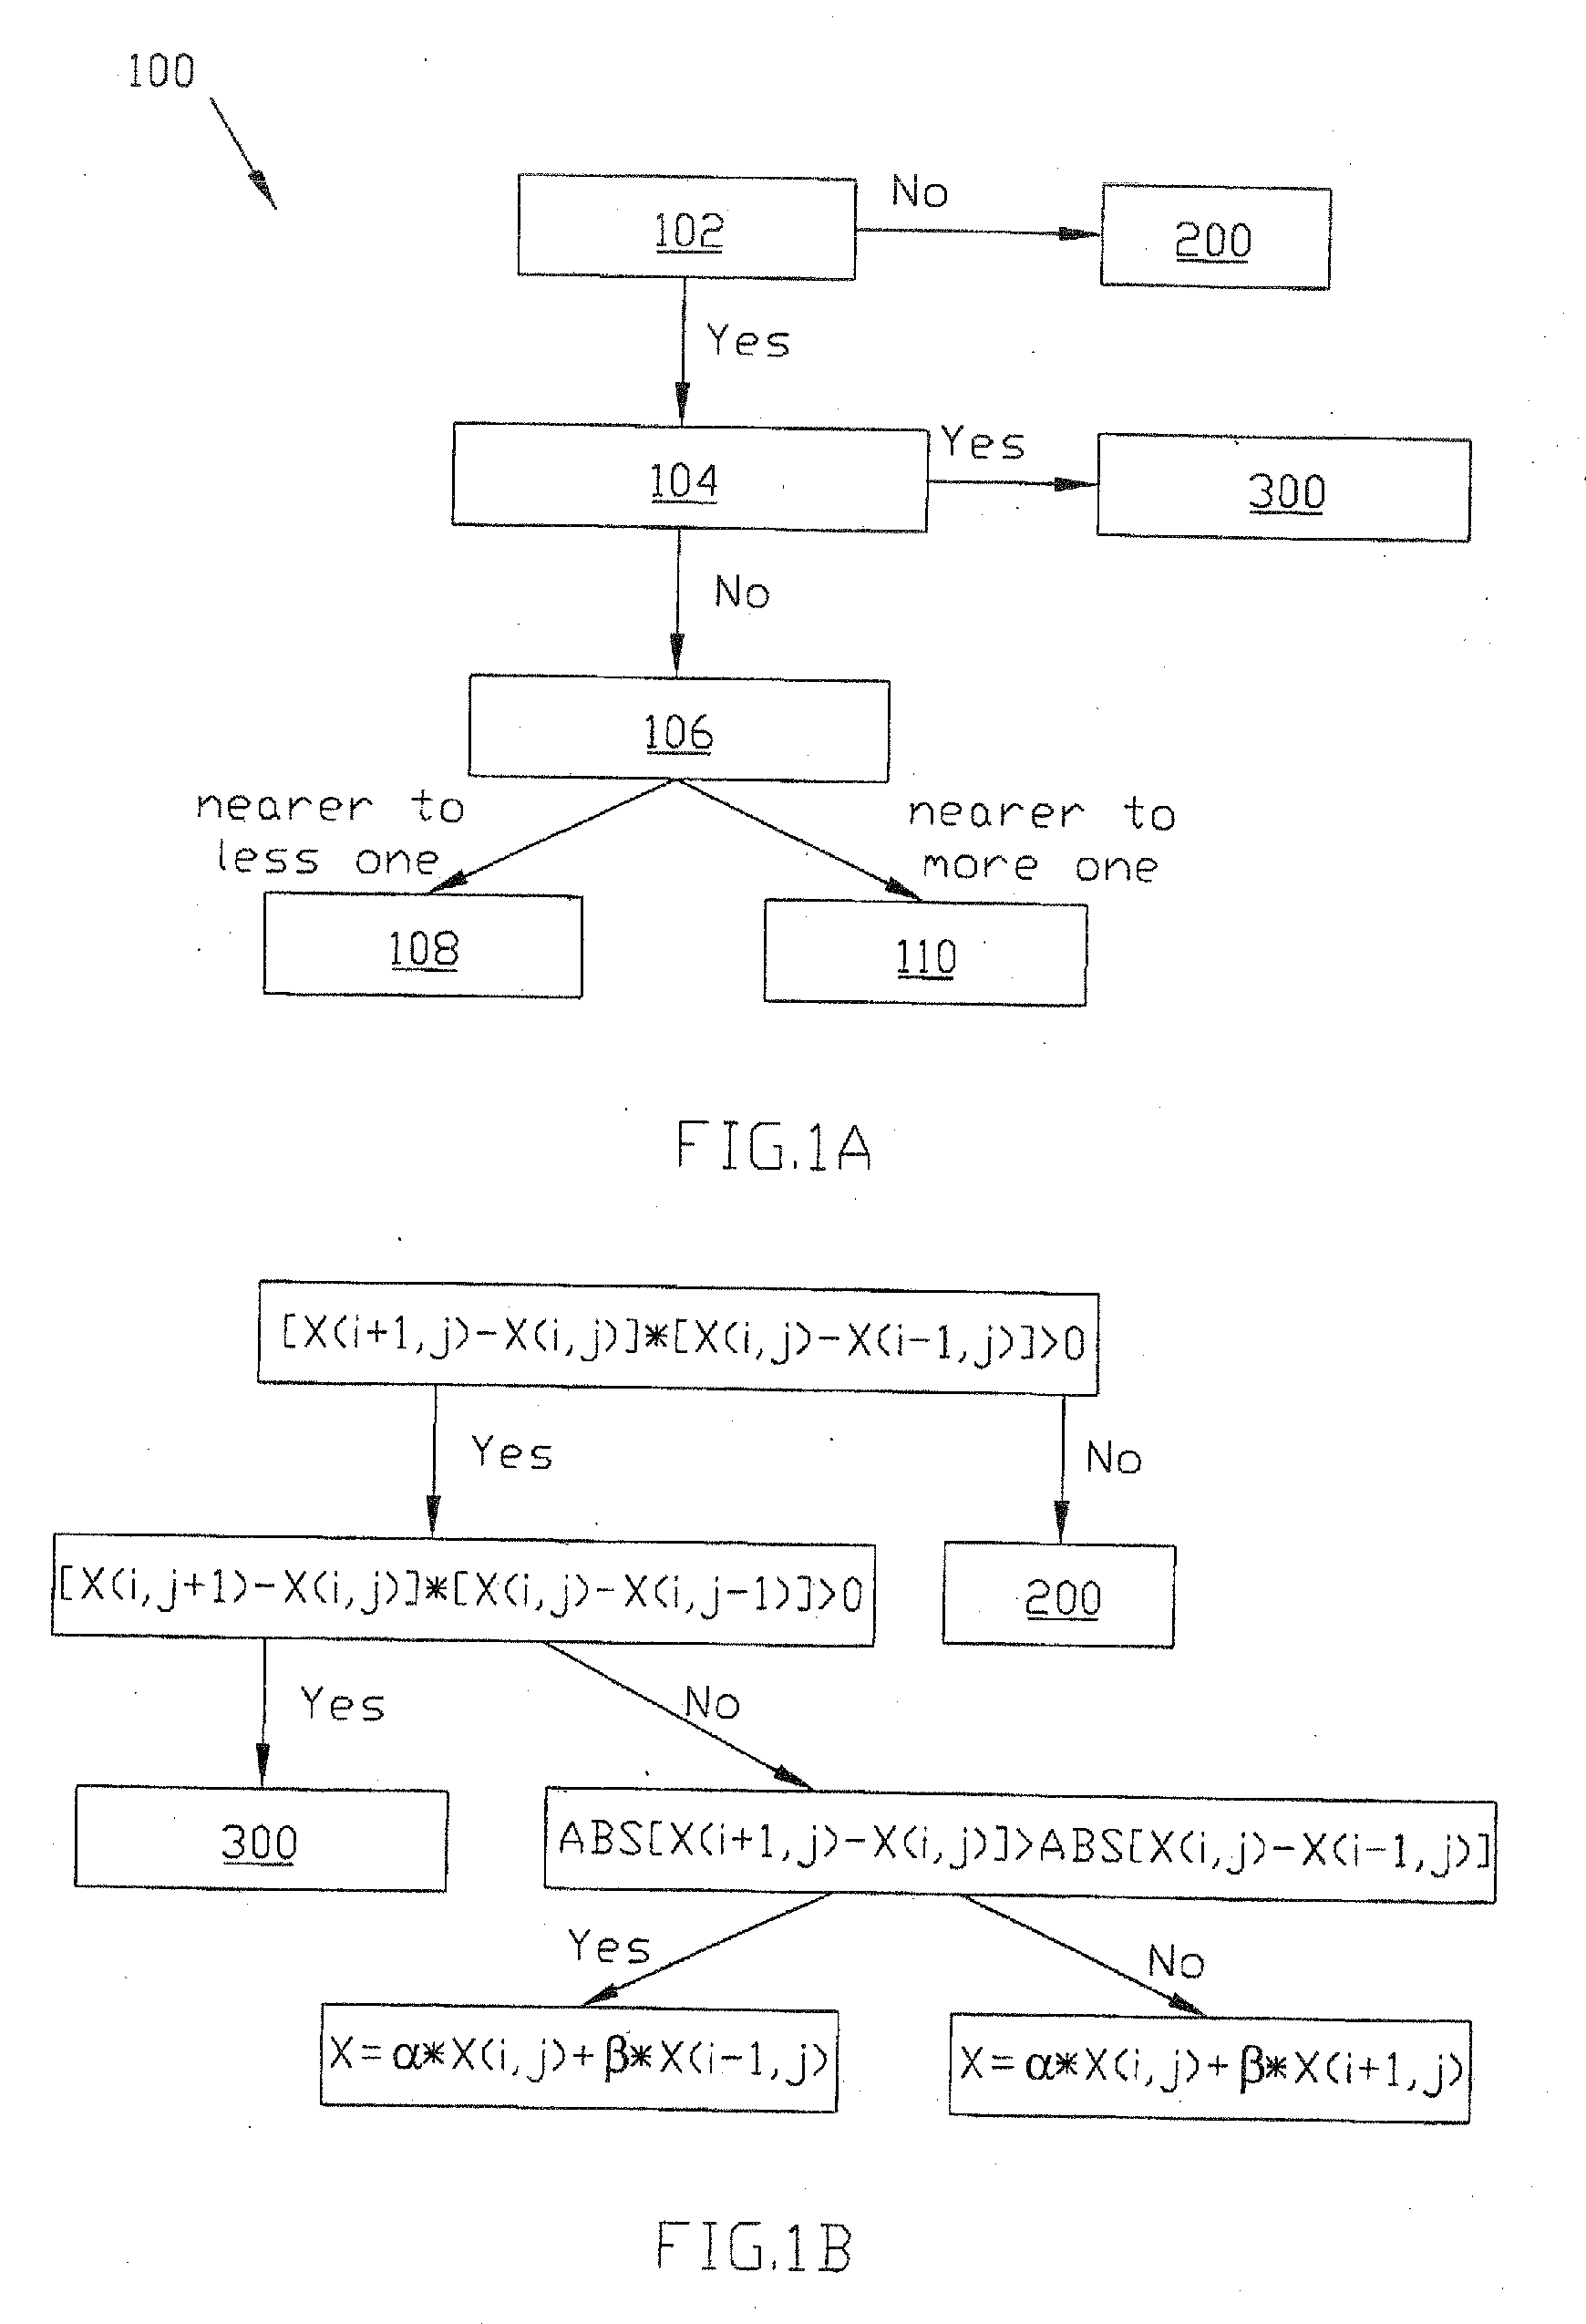 Modulation transfer function of an image